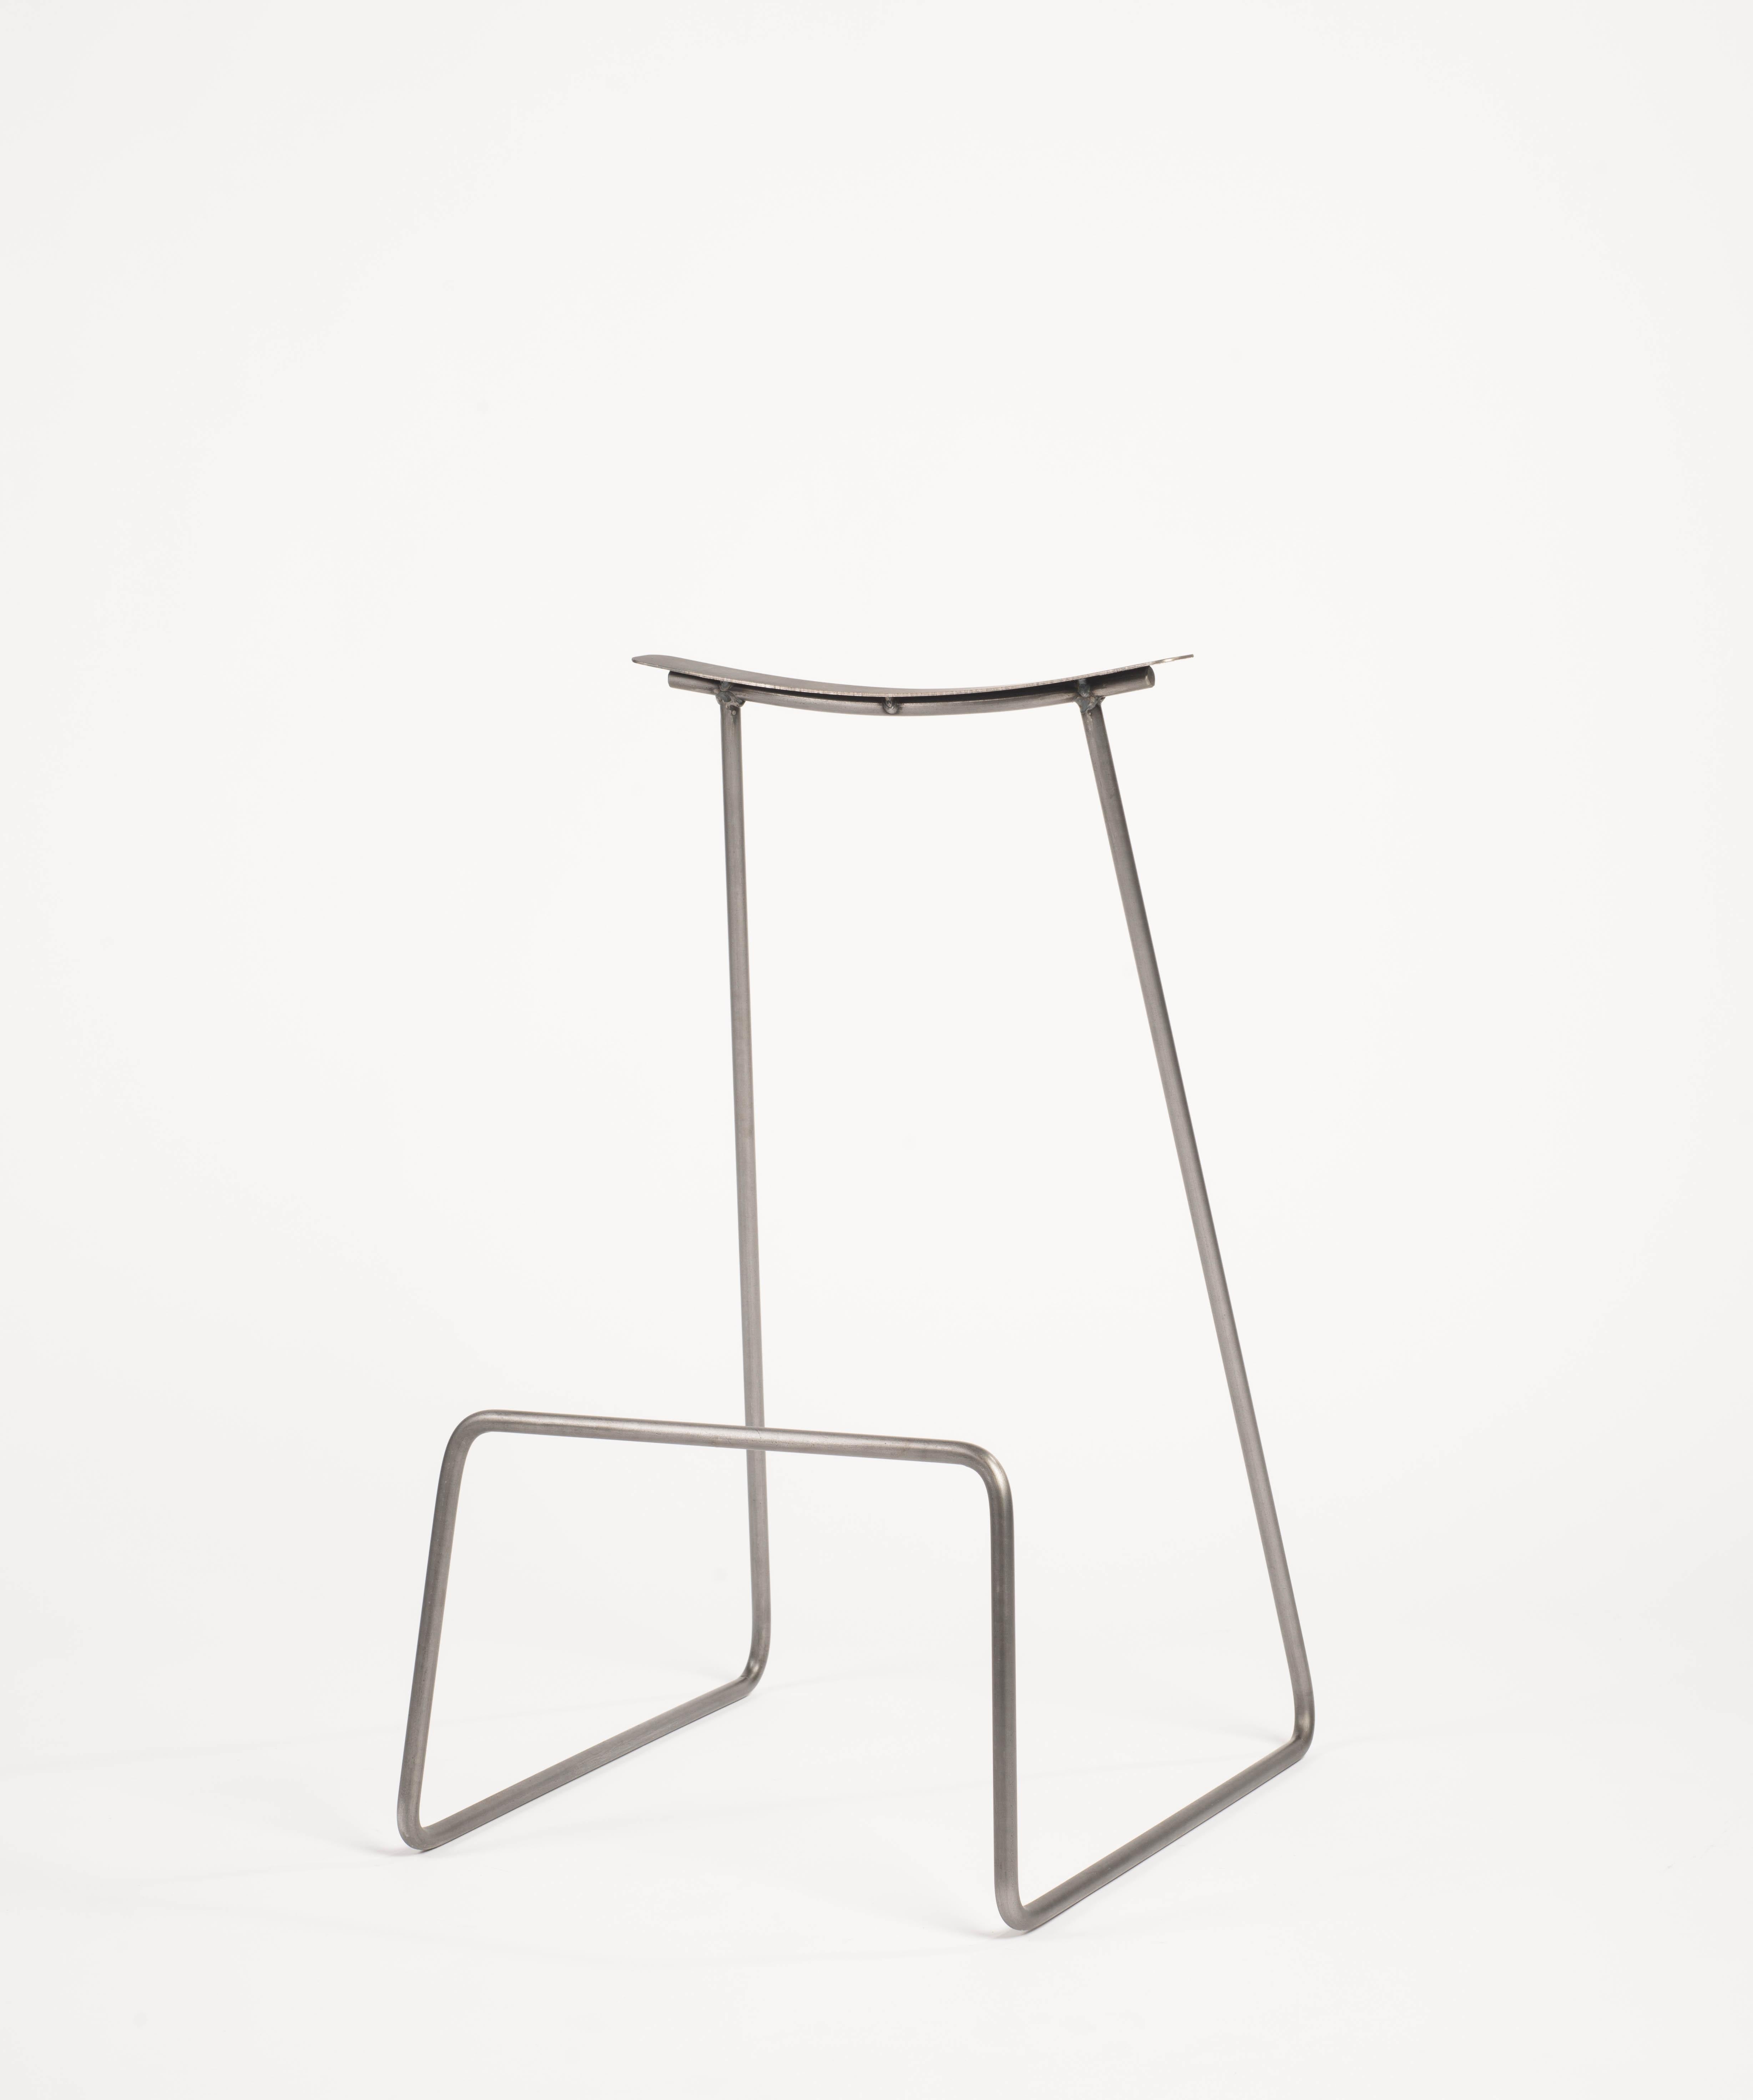 One line stool by Neil Nenner
Punctuation Marks
Dimensions: Height 70 x Length 45 x Width 40 cm
Materials: Steel tubes and rods with a natural finish
 Corten sheets 
 
Neil Nenner (b.1977, Kibbutz Mevo Hama), Independent designer / Artist and